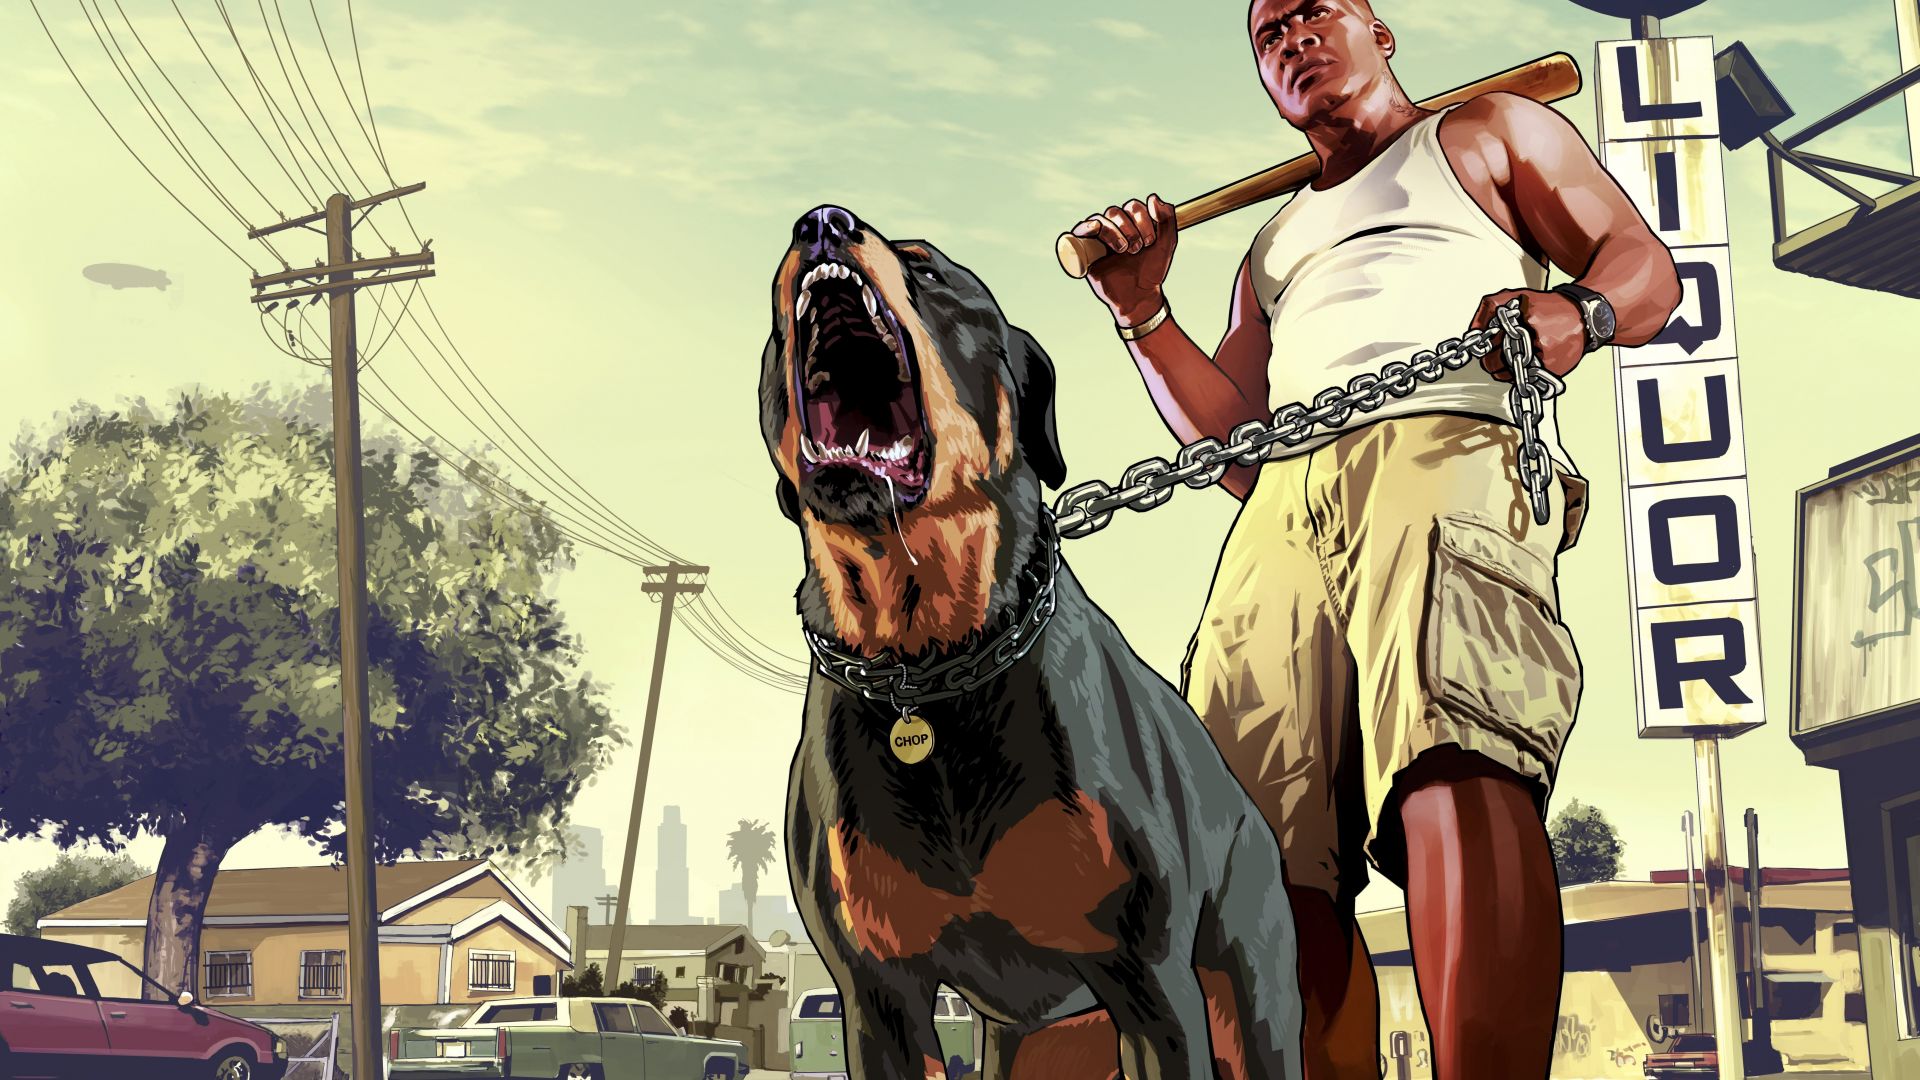 Desktop Wallpaper Grand Theft Auto V, Franklin With Chop, Rottweiler, Video Game, 8k, HD Image, Picture, Background, Bd1131